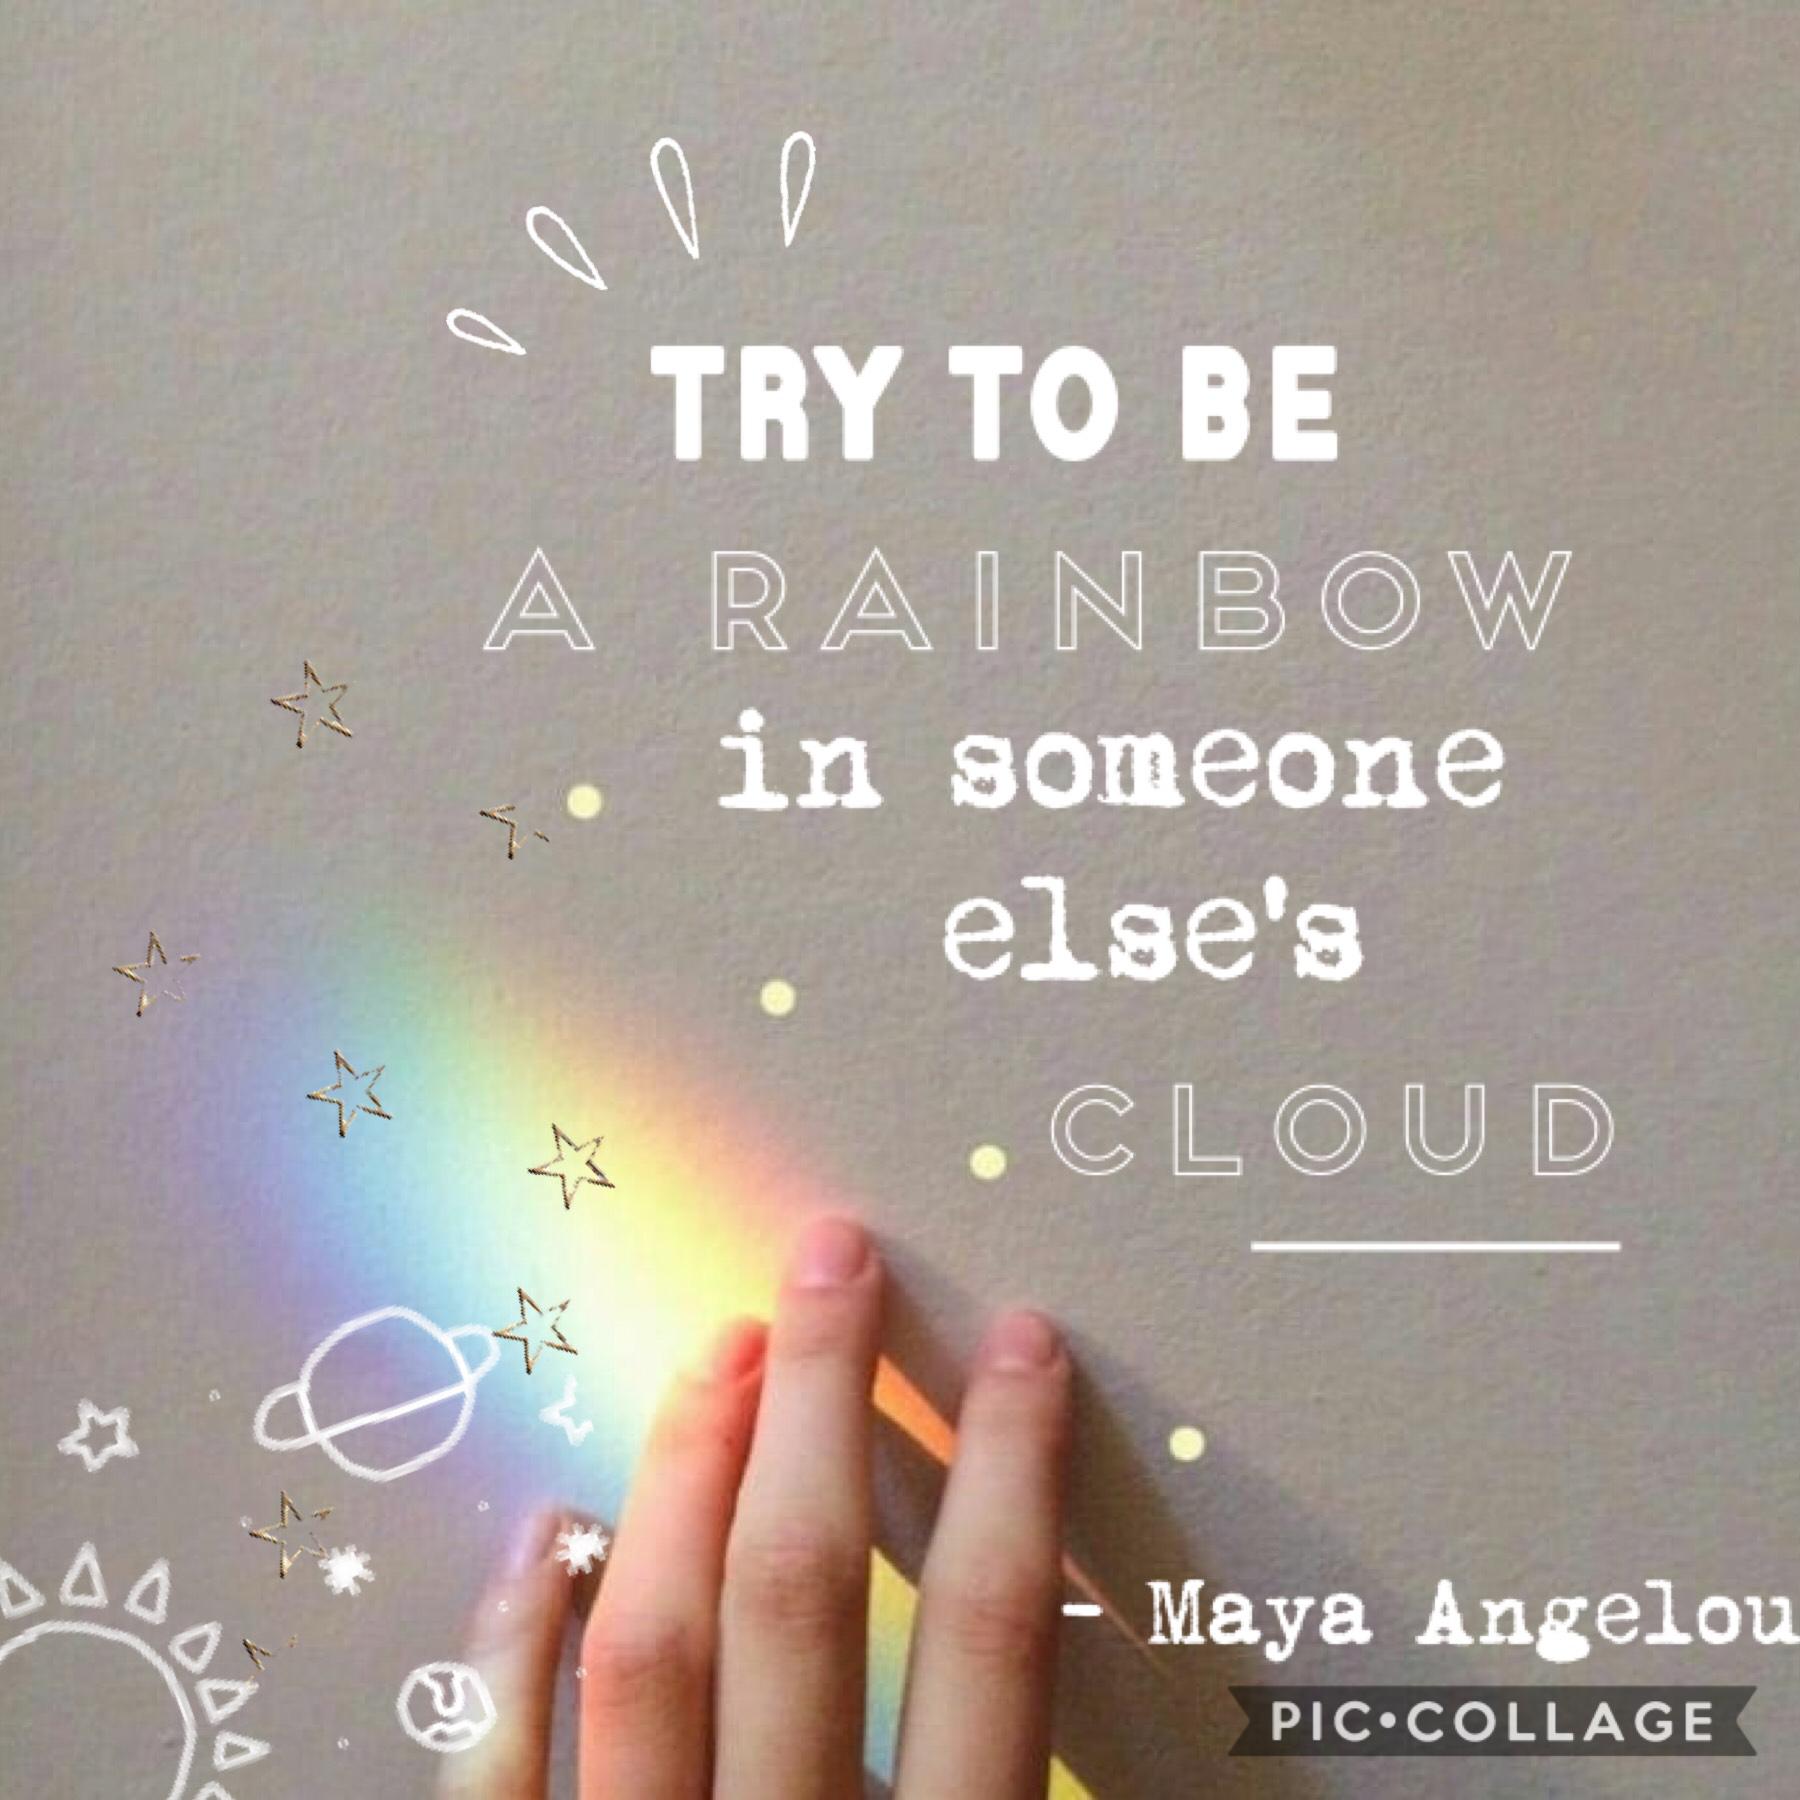 ☁️🌈Try to be a rainbow in someone else’s cloud🌈☁️
I’m back!! I haven’t posted in so long
This collages is pretty simple but I kinda really like it :)